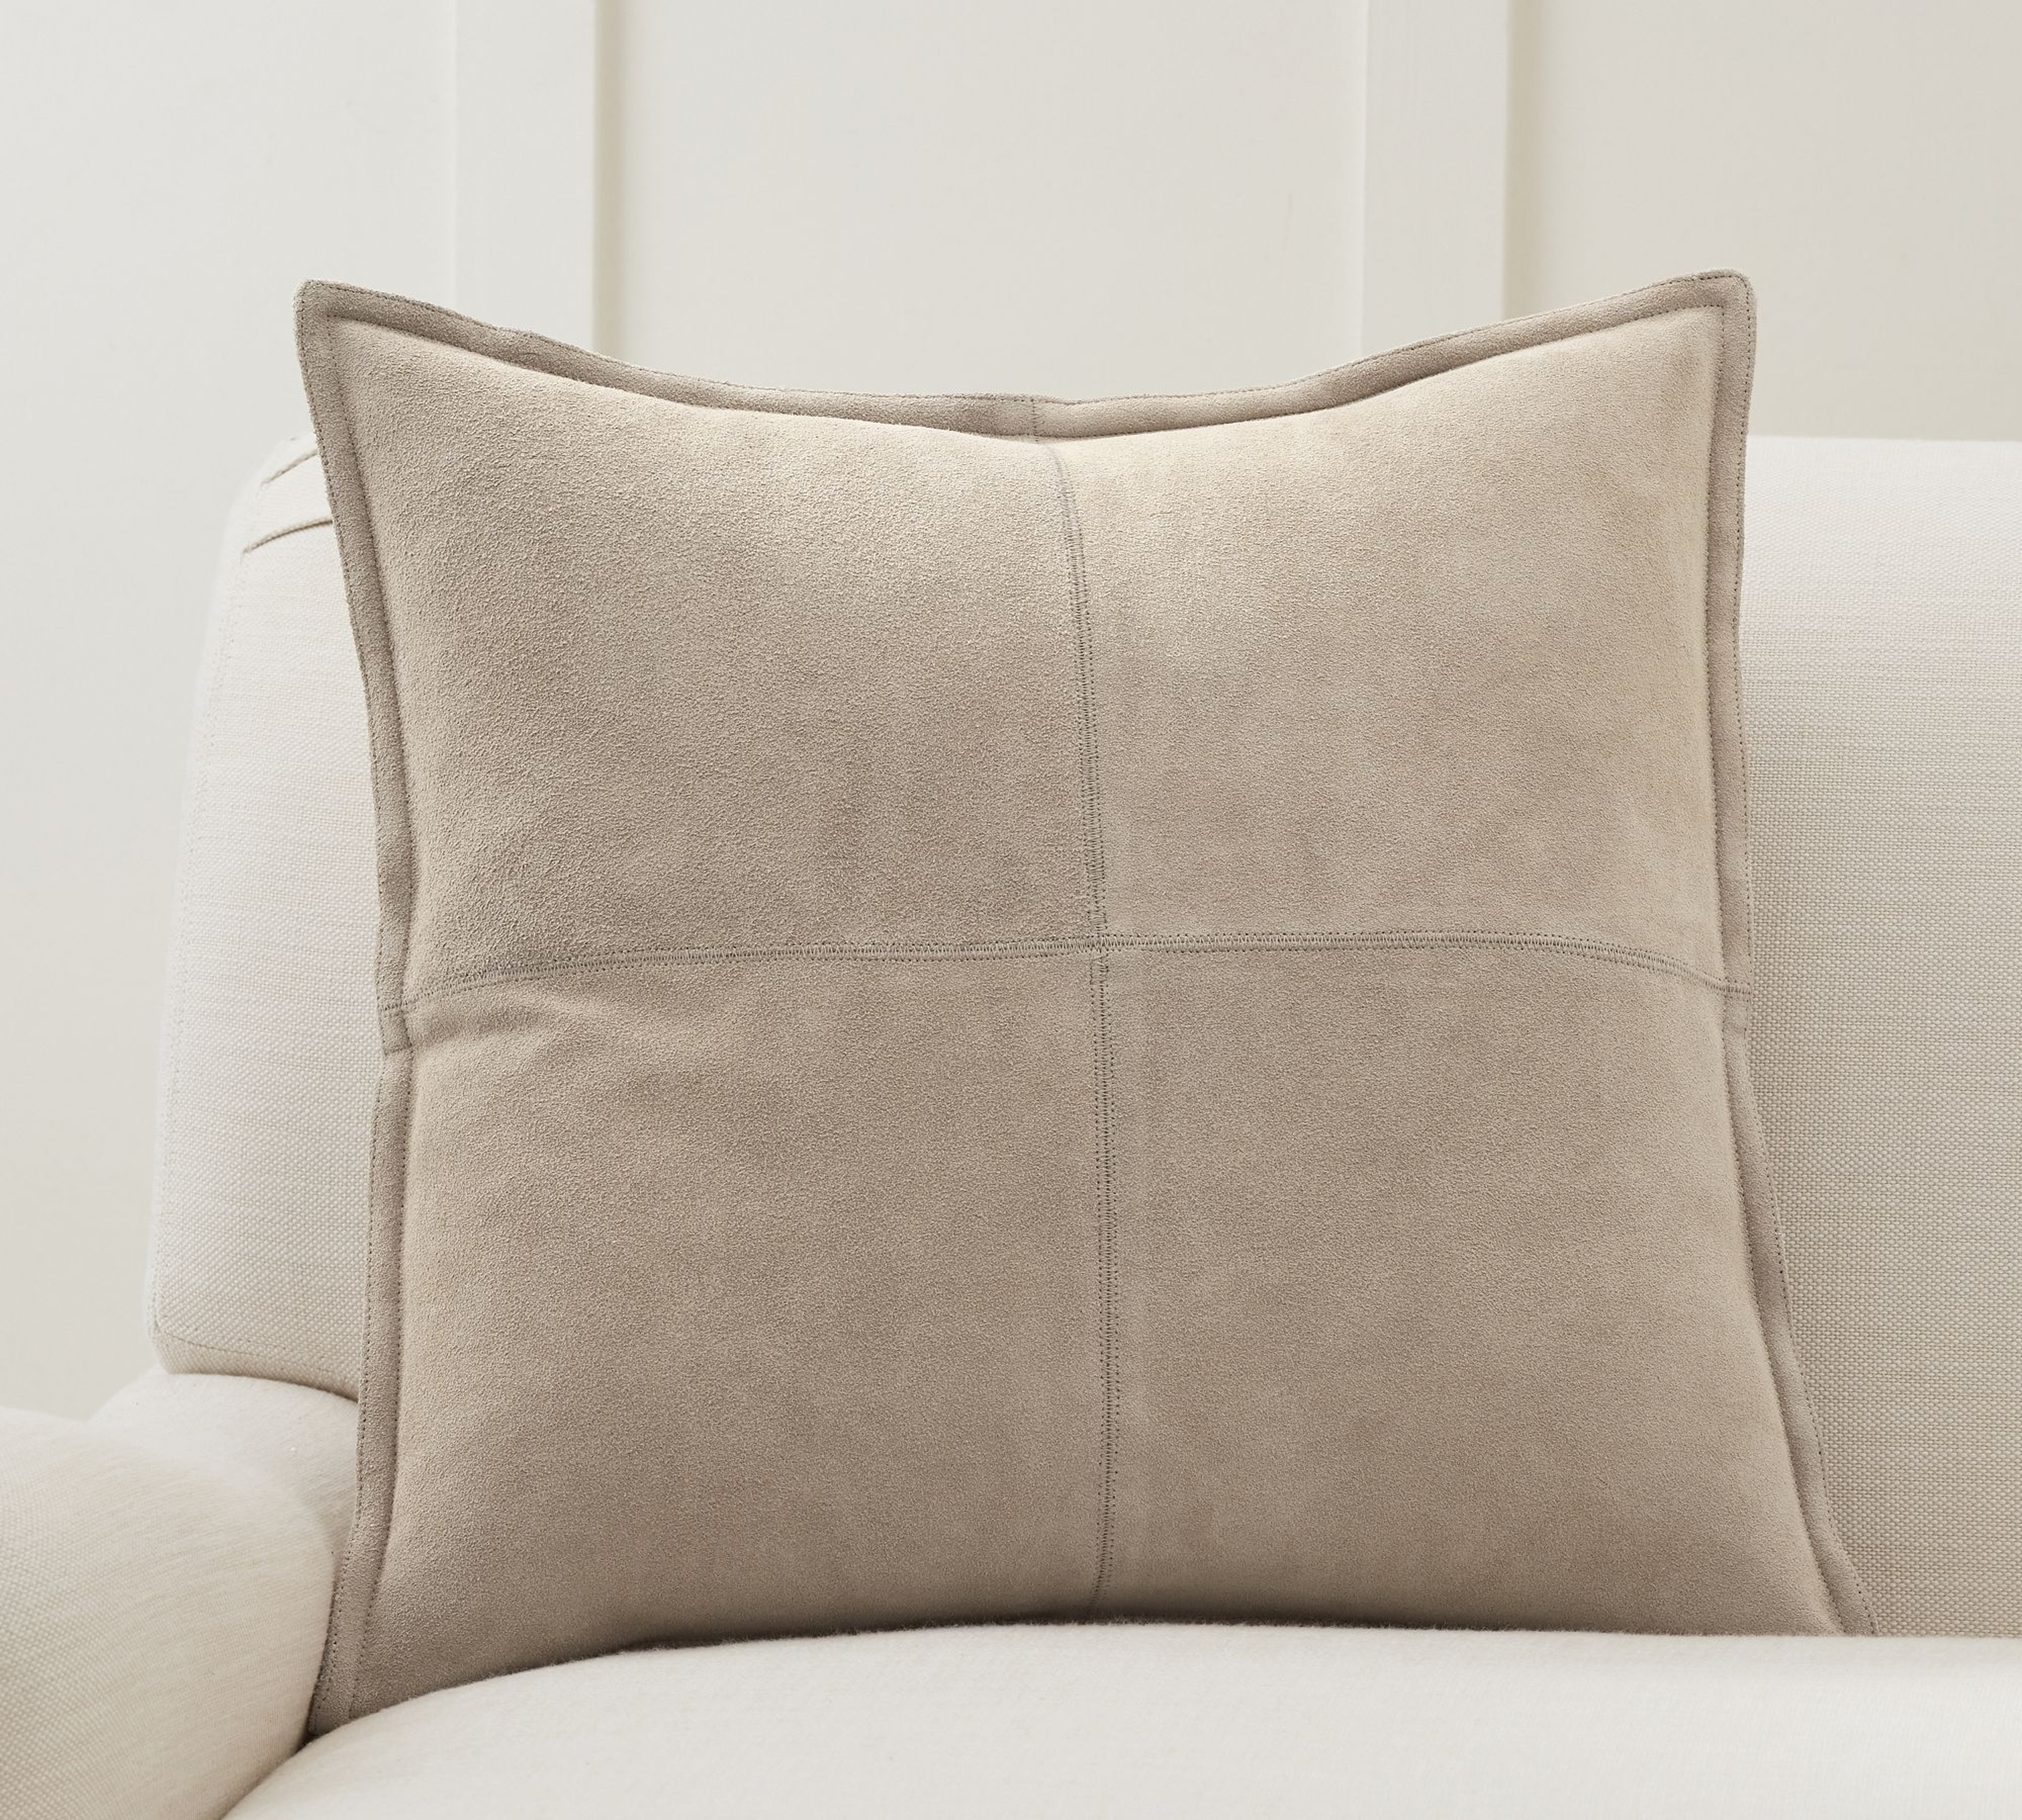 Pieced Suede Pillow Cover, 20", Stone - Pottery Barn